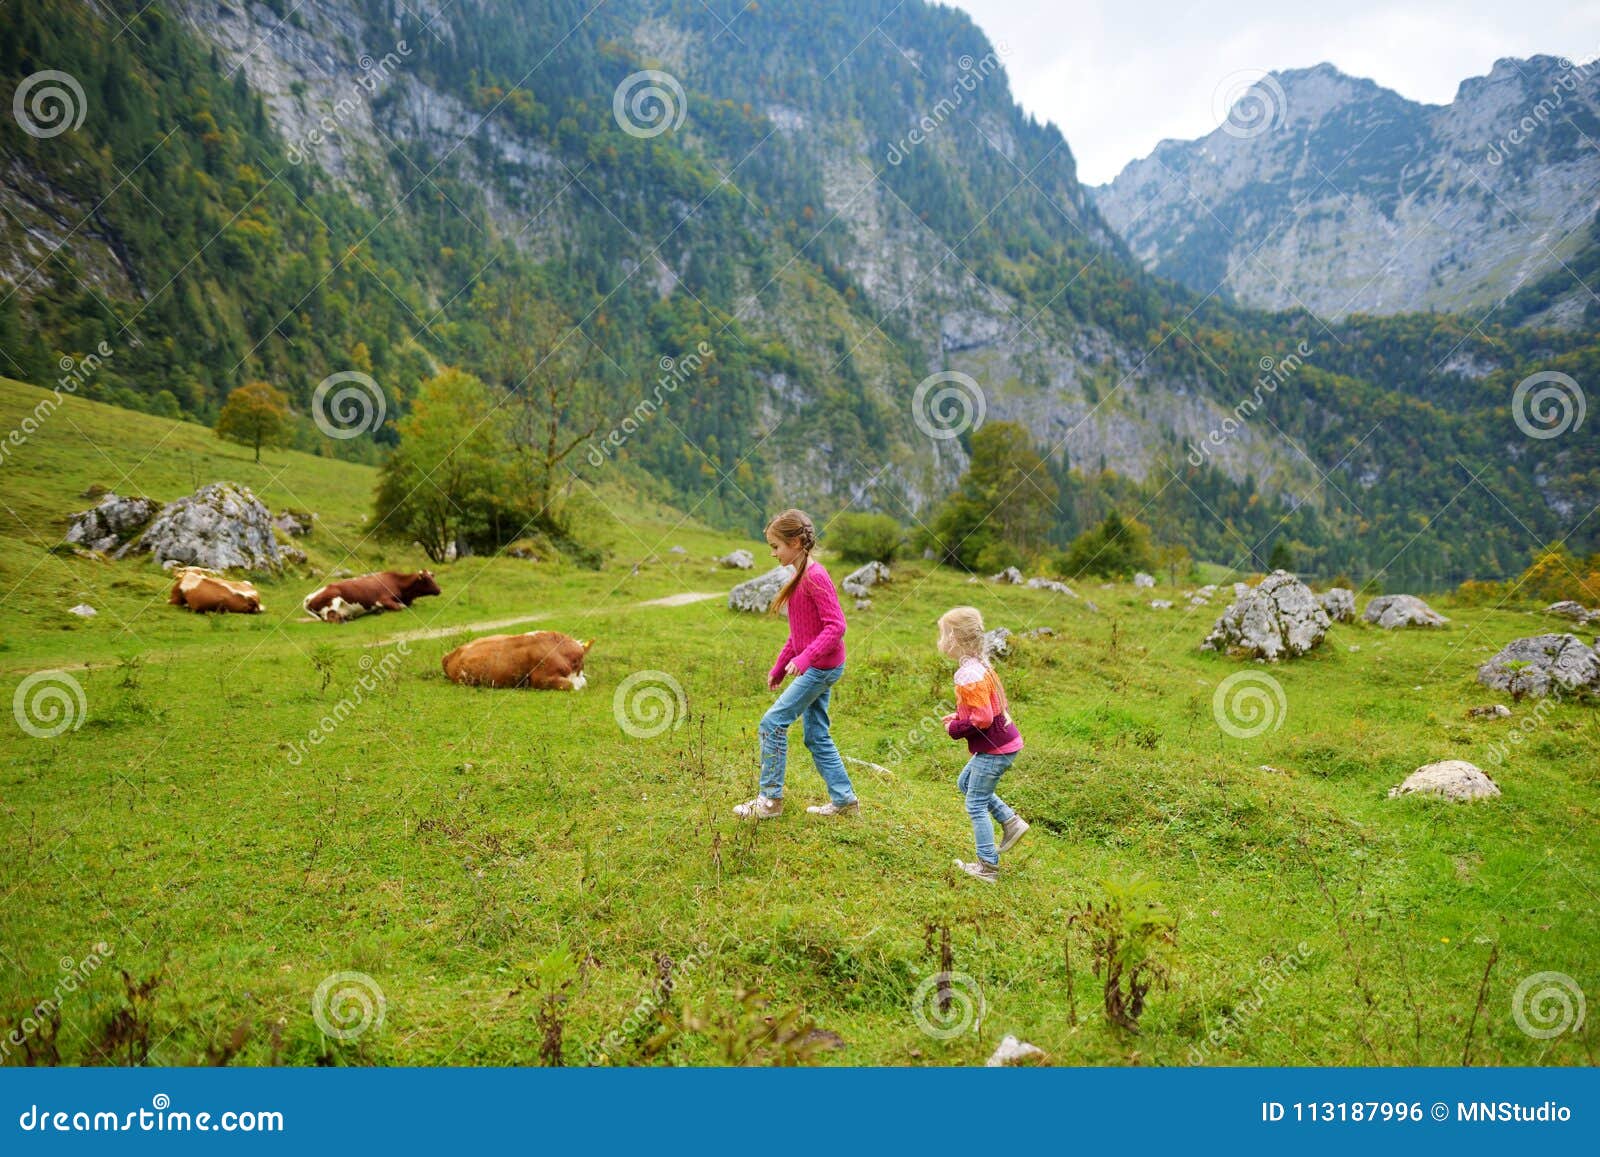 Two Sisters On A Hiking Trails Around Picturesque Konigssee Known